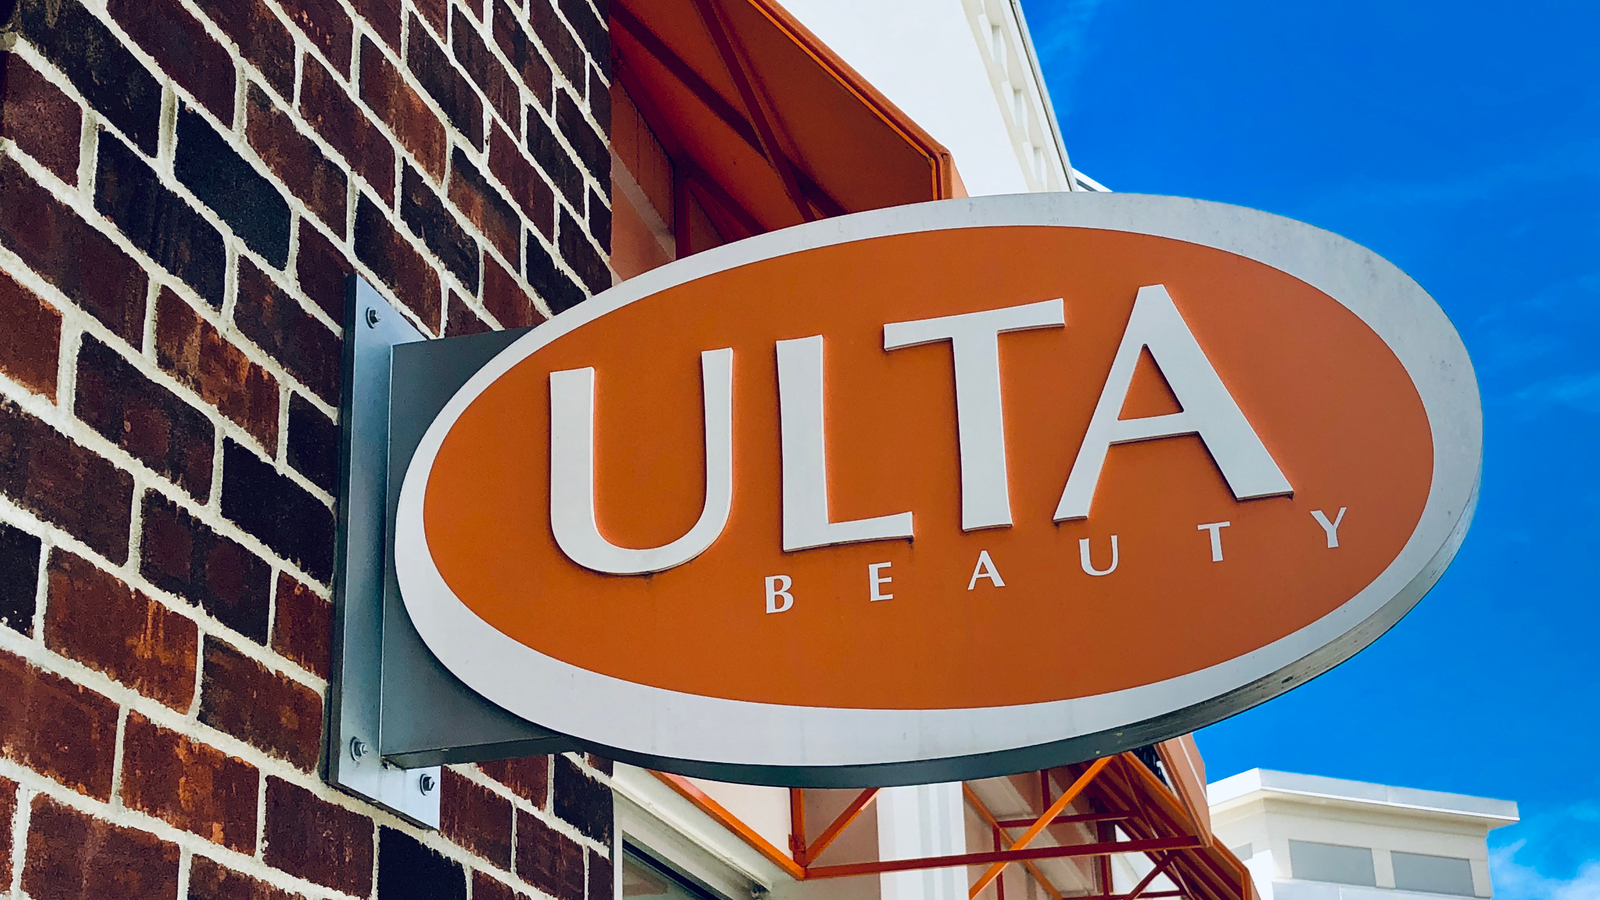 ULTA stock Ulta Beauty store front sign located at Laurel Town Centre in Laurel, Maryland.